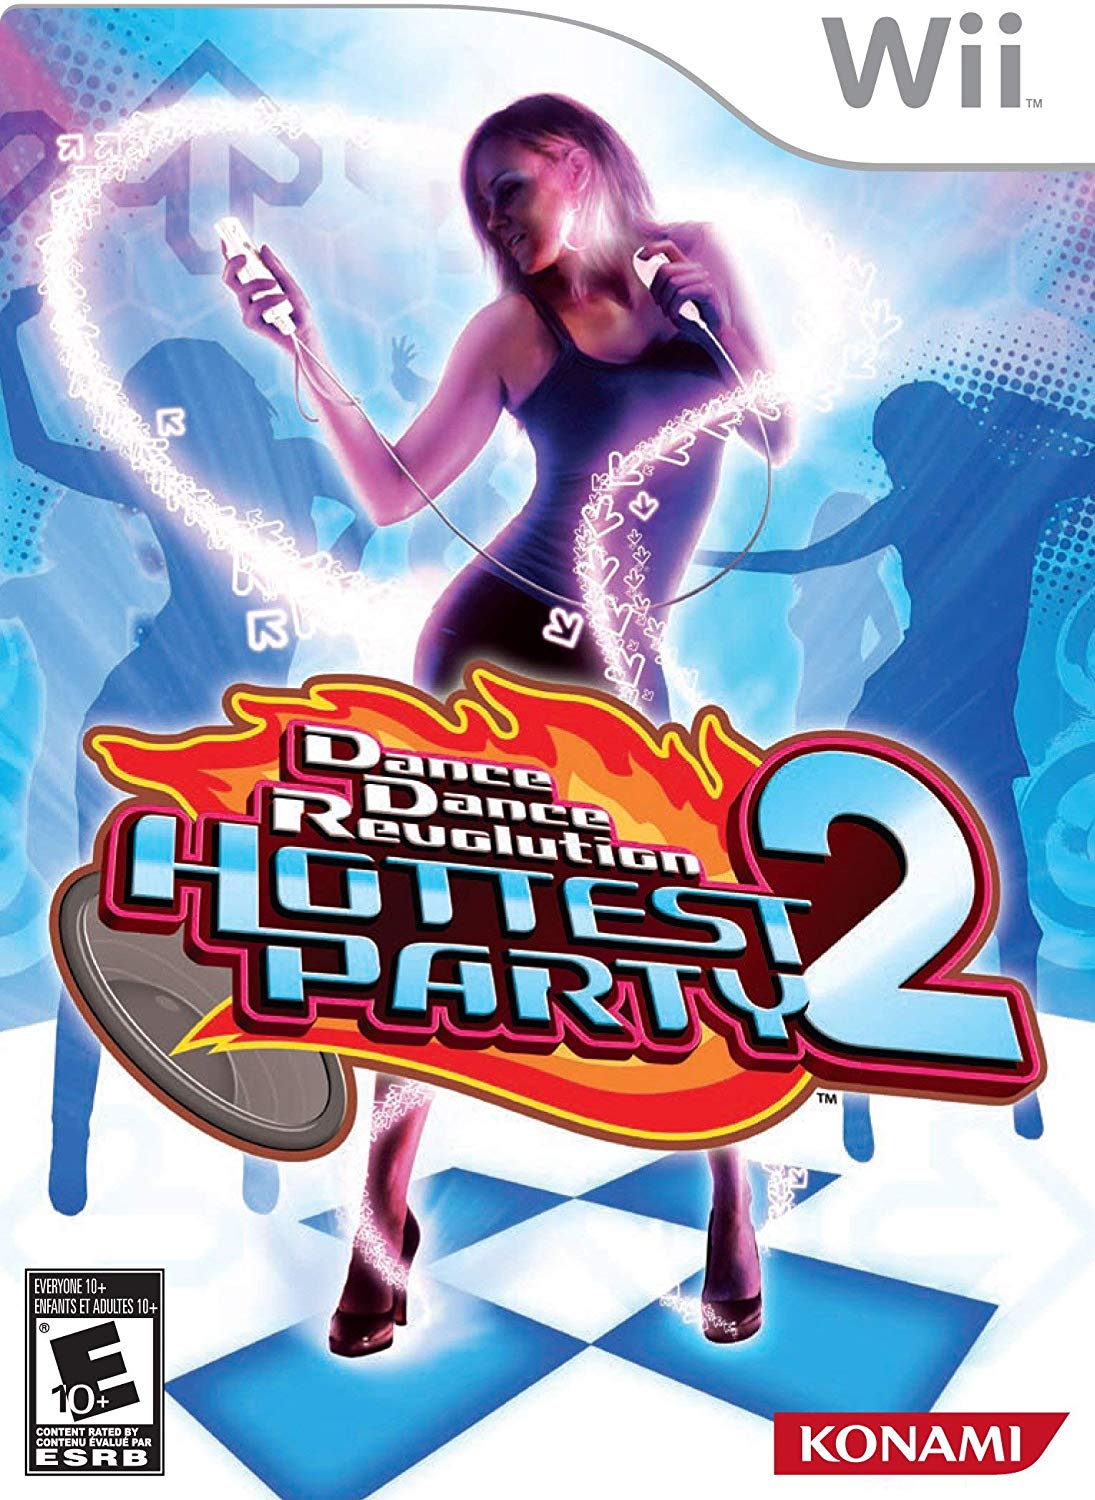 Used Dance Dance Revolution Hottest Party 2 - Software Only - Nintendo Wii (Used) - image 1 of 1